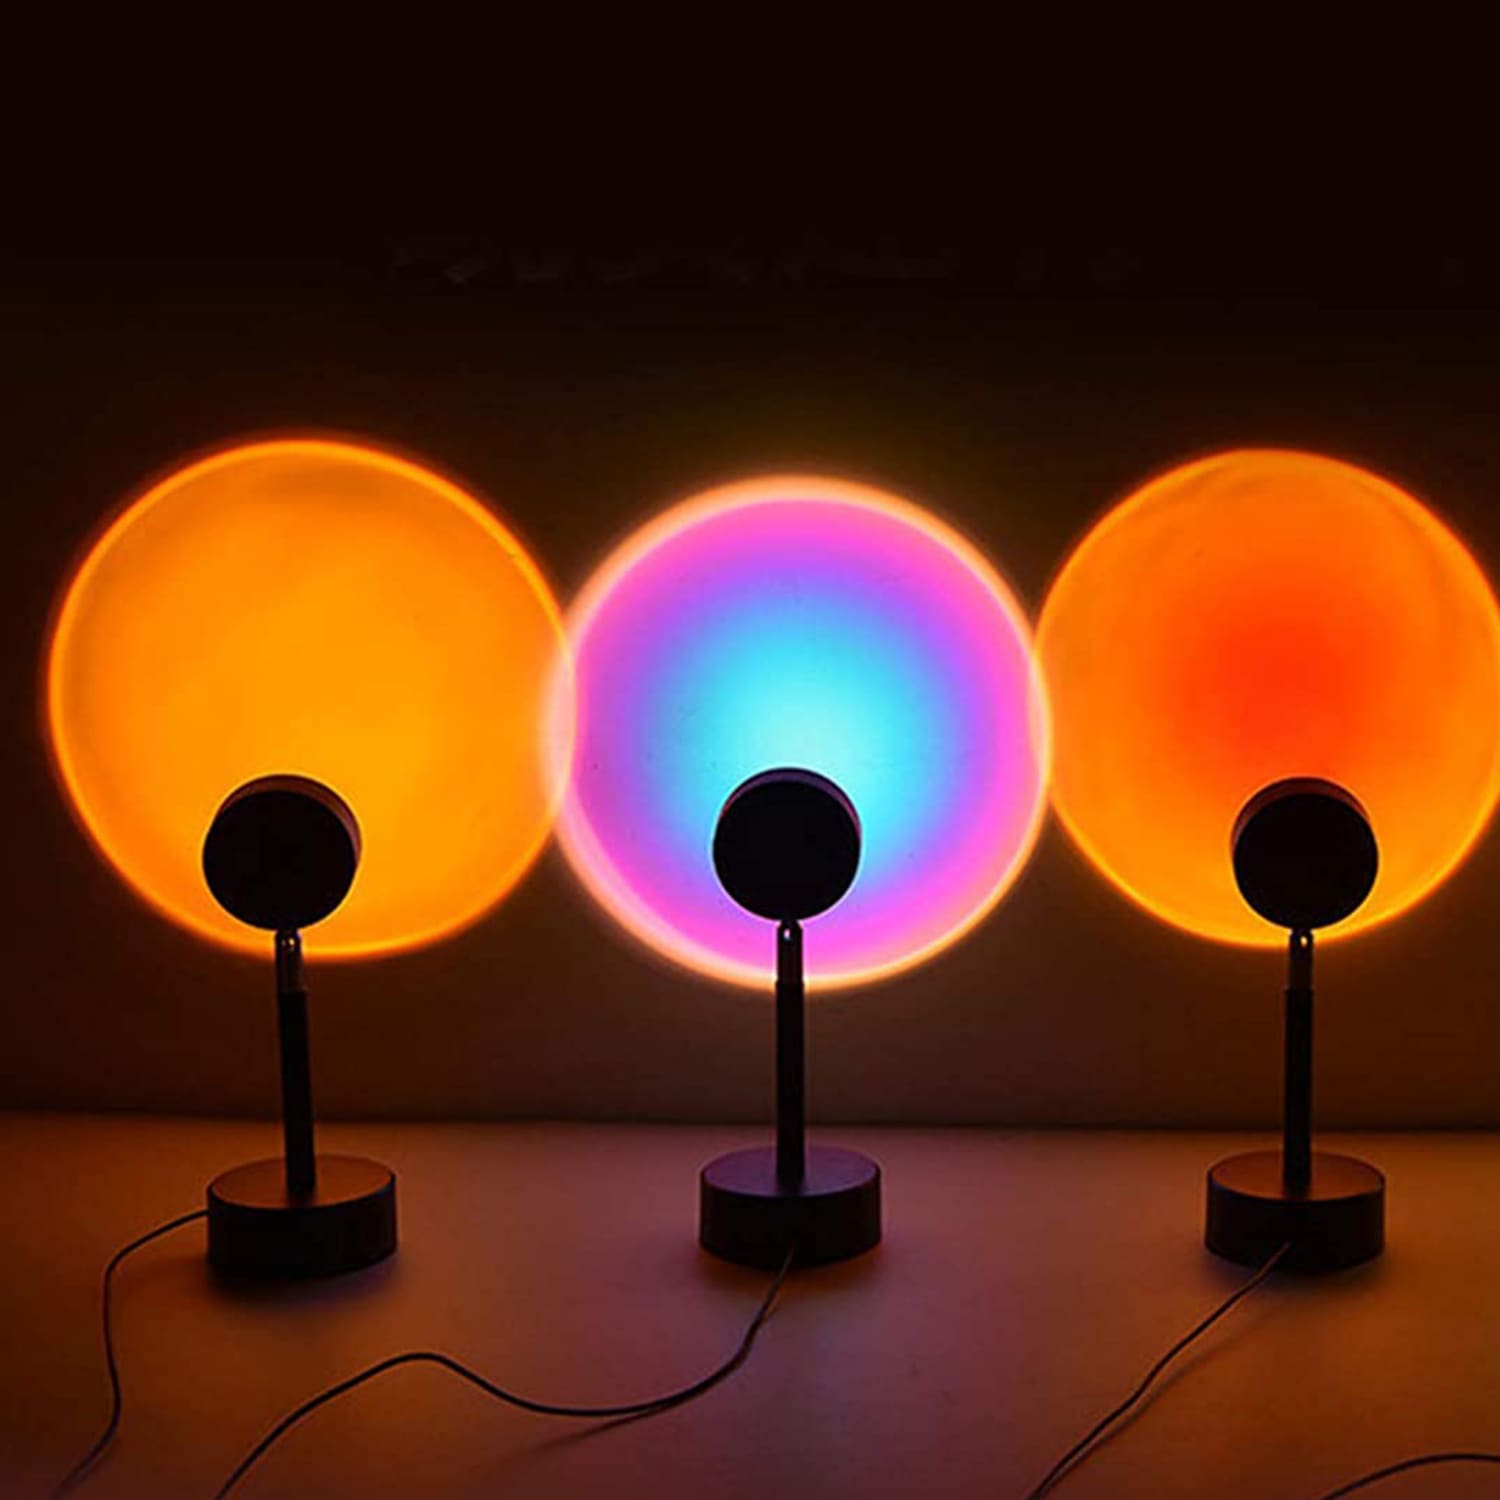 Sunset Projection Lamps Are Going Viral - PureWow